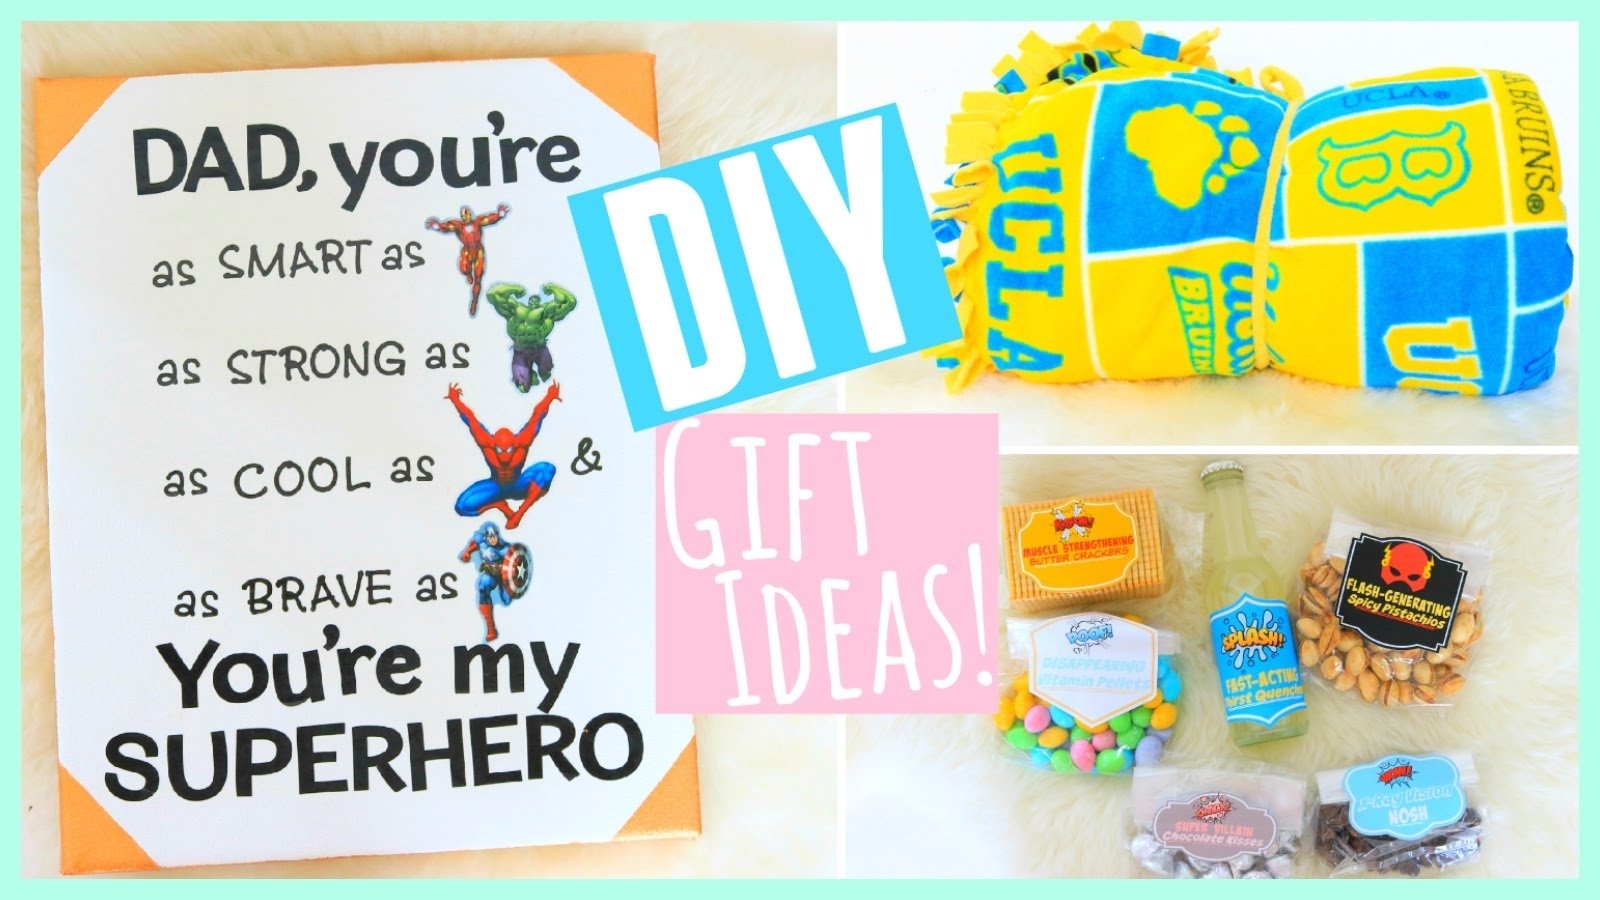 10 Gorgeous Ideas For Fathers Day Gifts diy gift ideas for fathers day 2015 youtube 9 2023